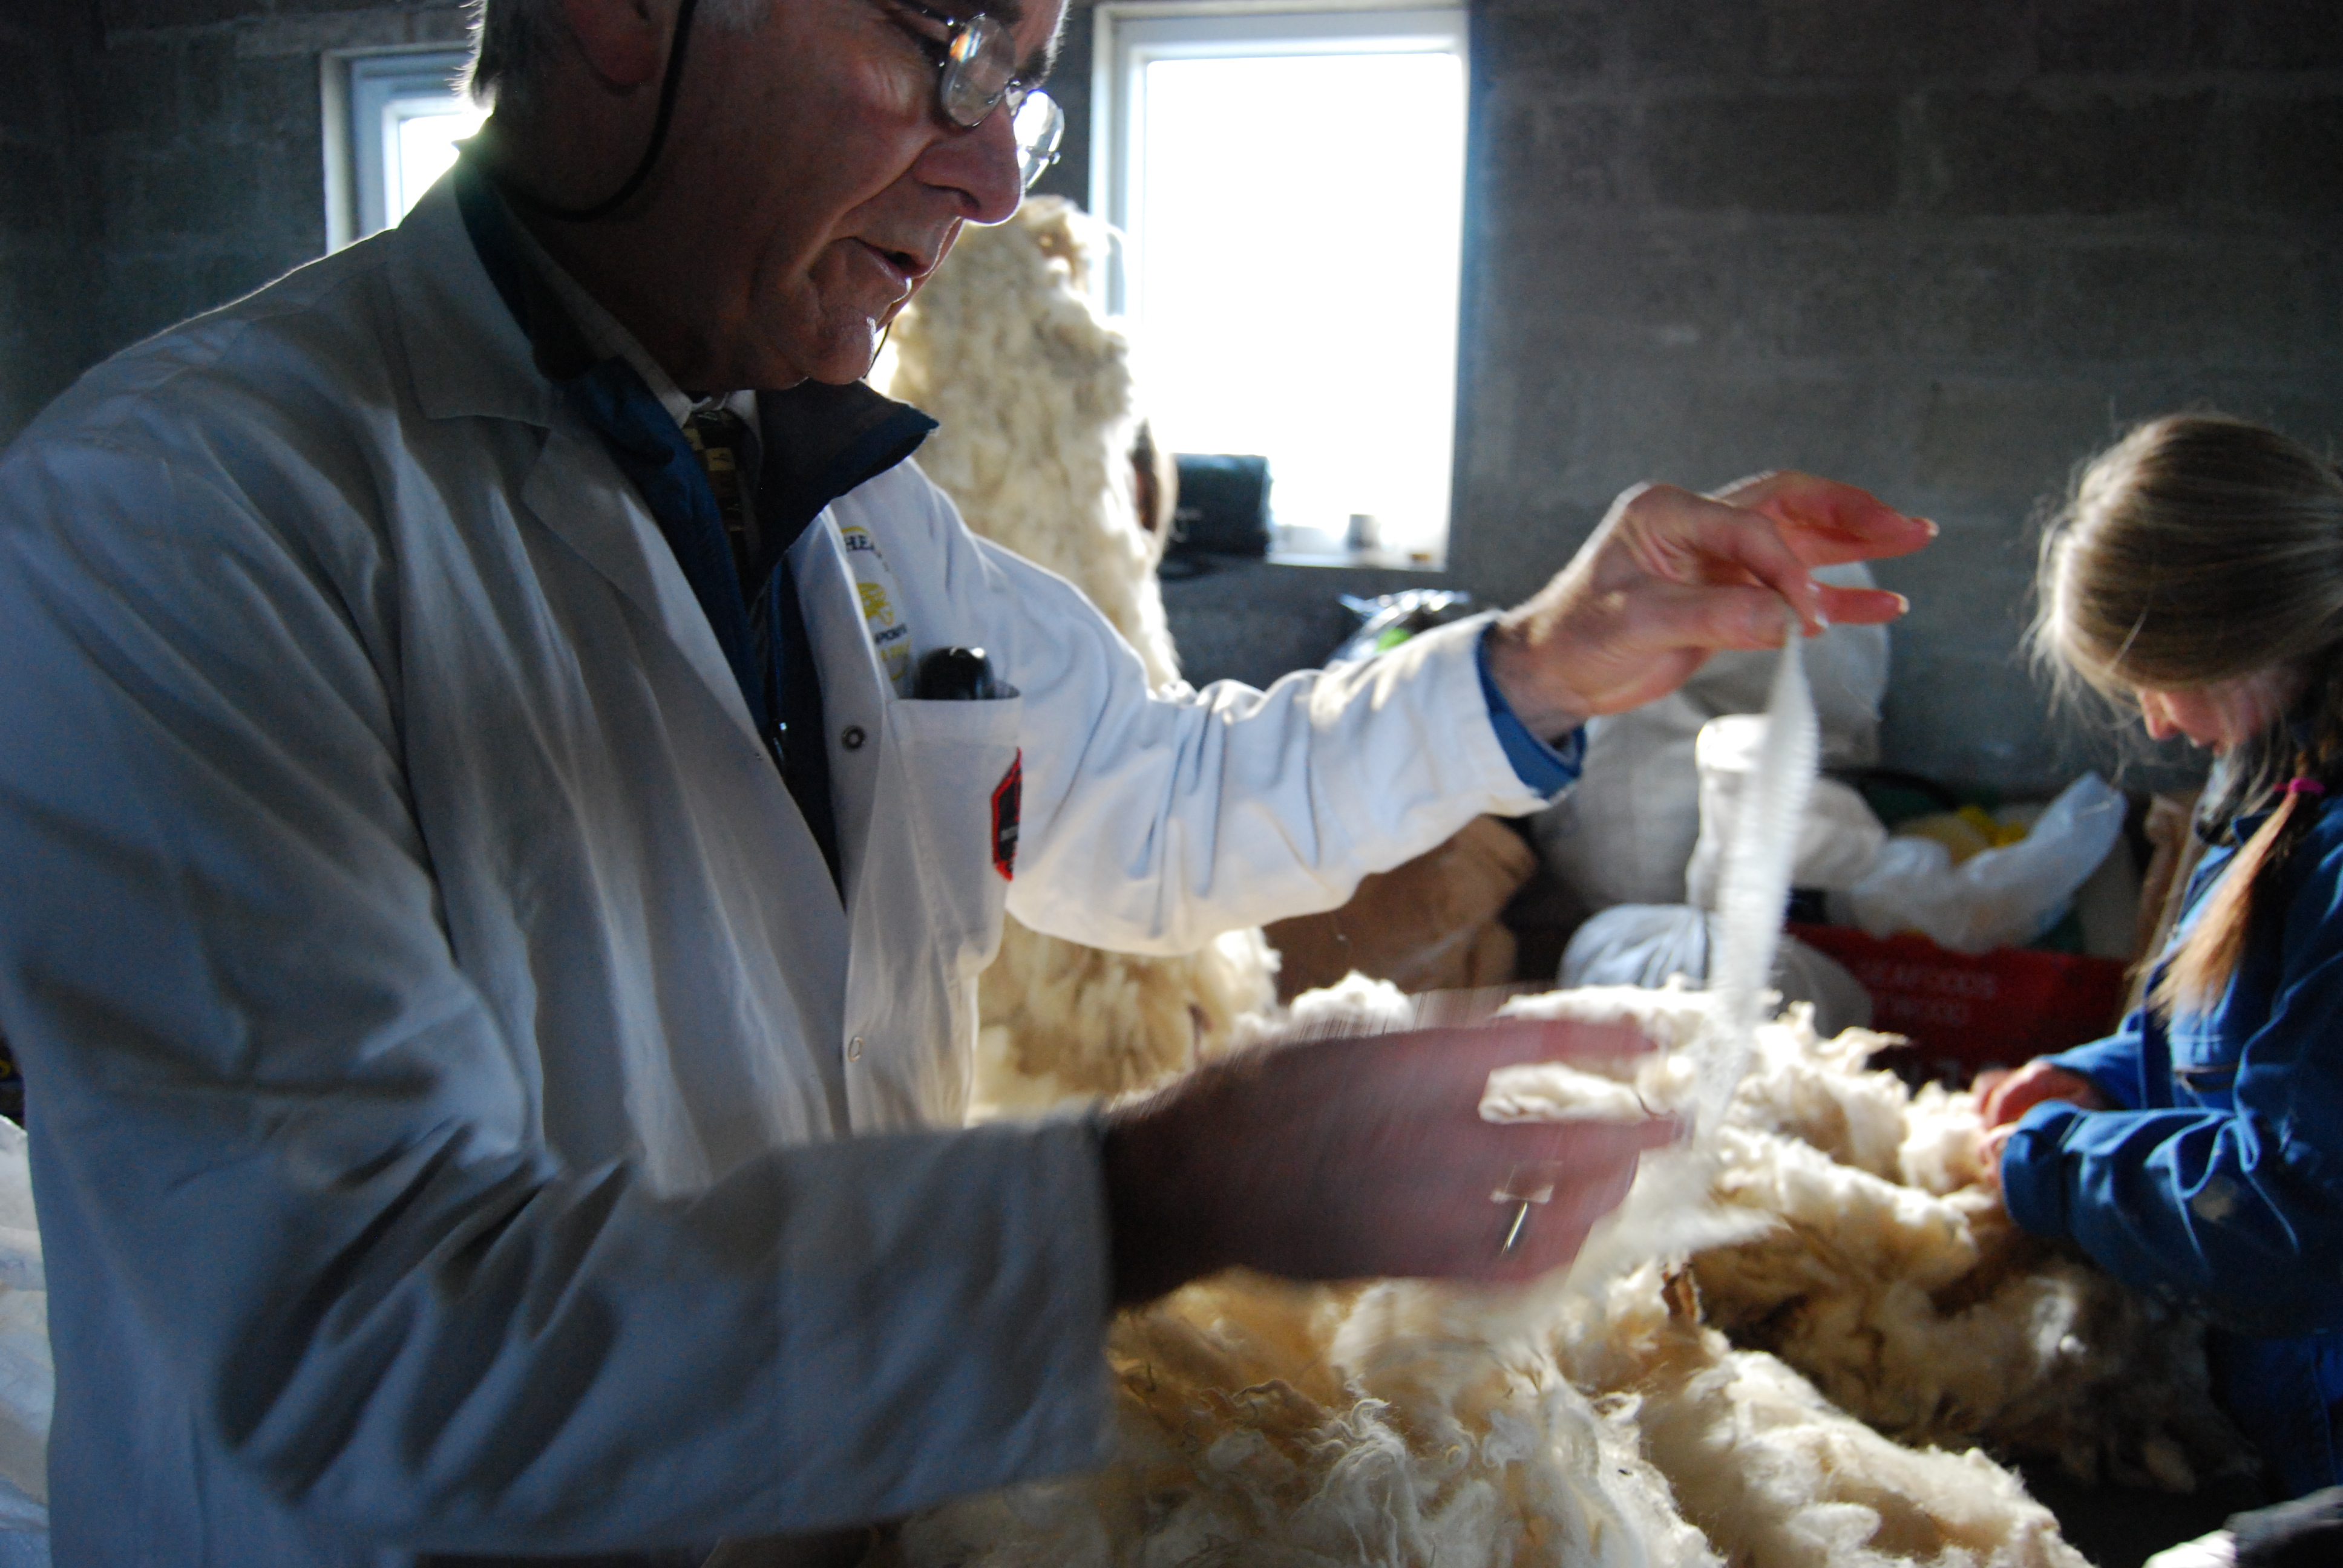 Trainees take part in a wool grading workshop